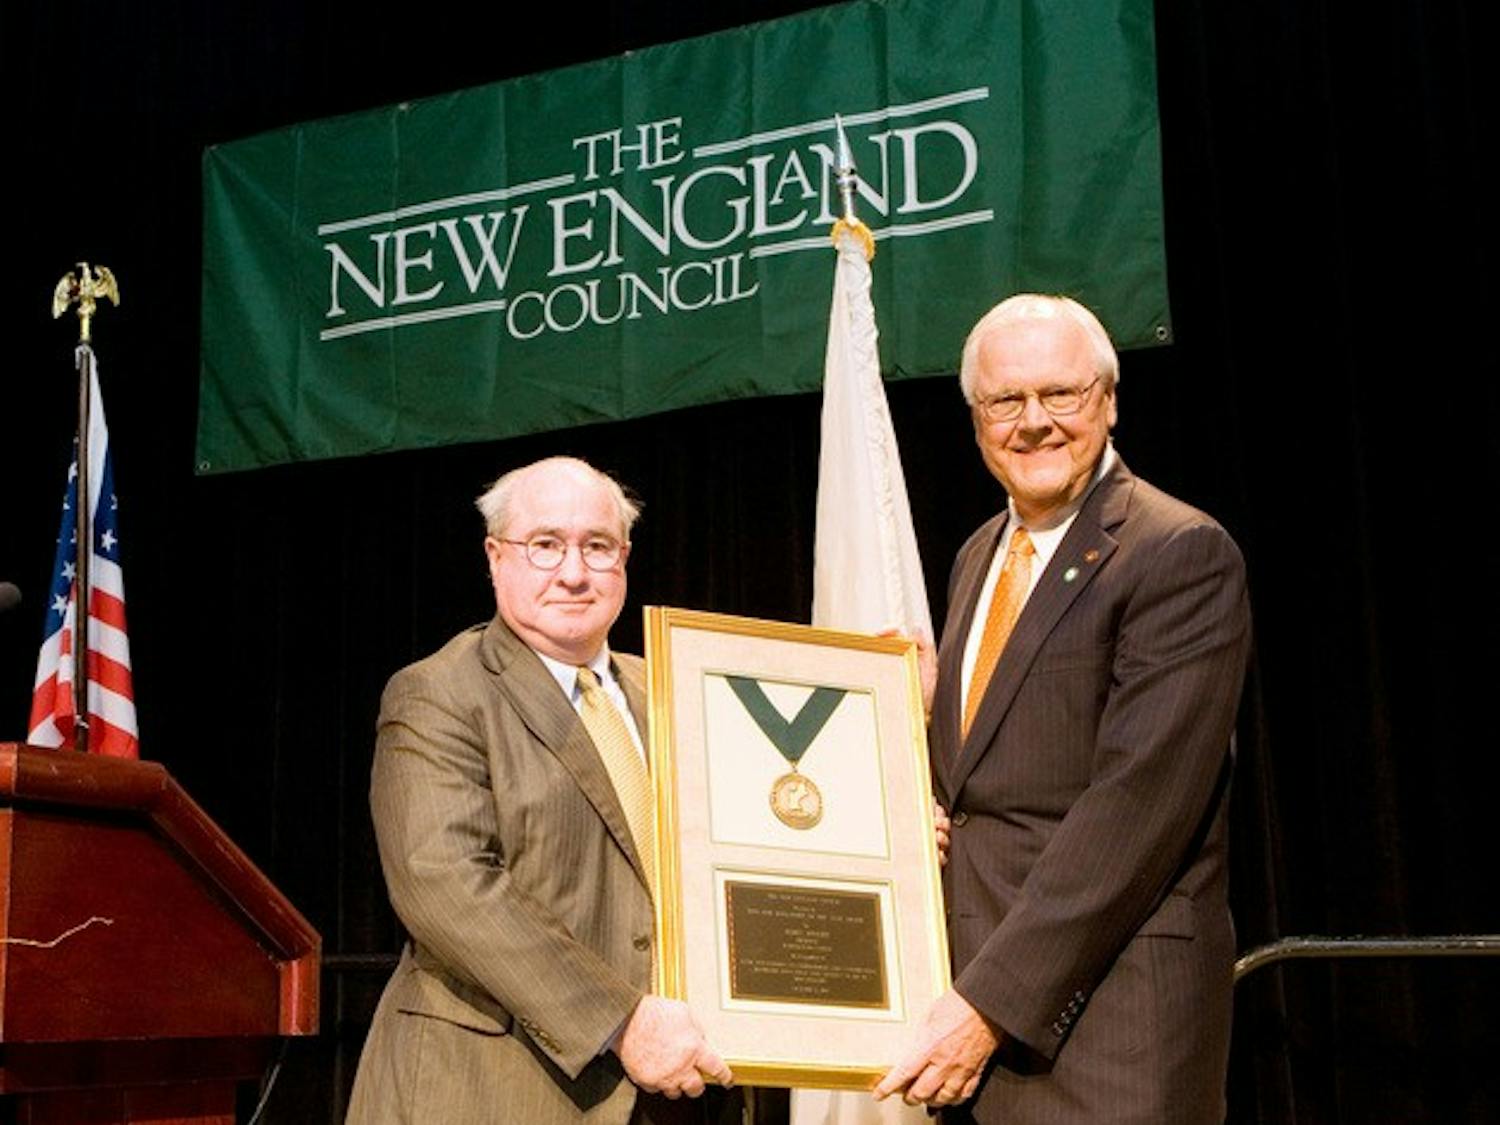 College President James Wright received a New Englander of the Year award last night for his efforts to help send wounded veterans to college.